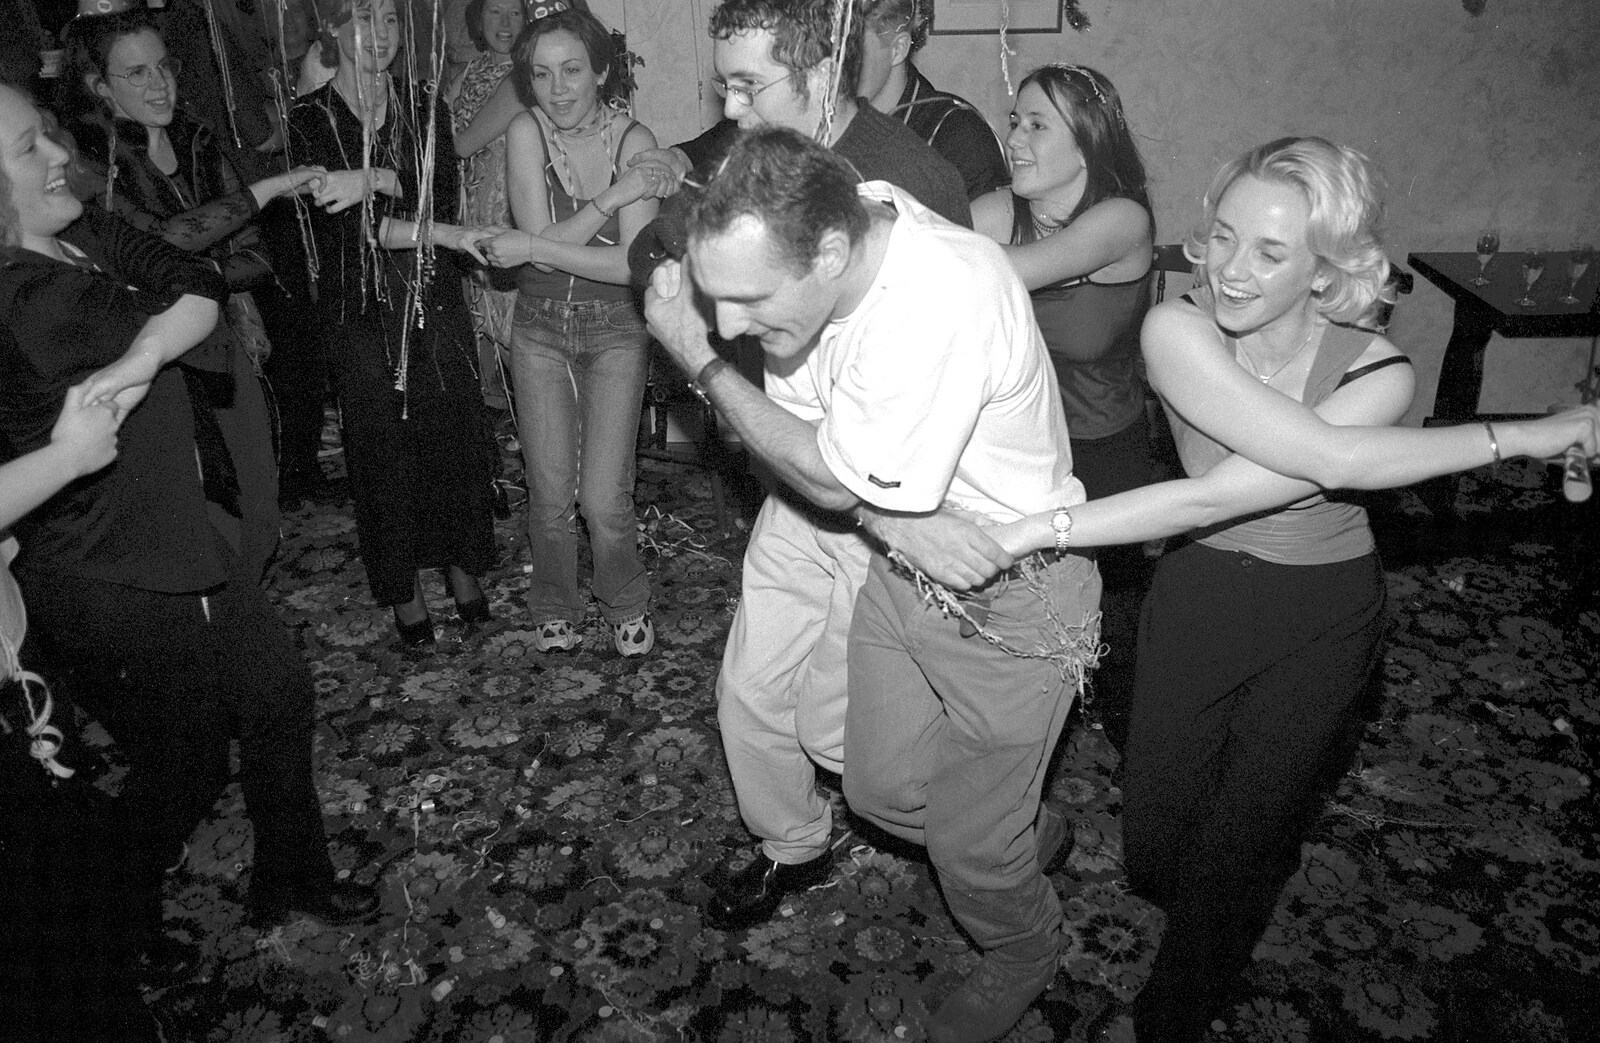 Marcus and Emma get down for Auld Lang Syne from New Year's Eve at The Swan Inn, Brome, Suffolk - 31st December 1999